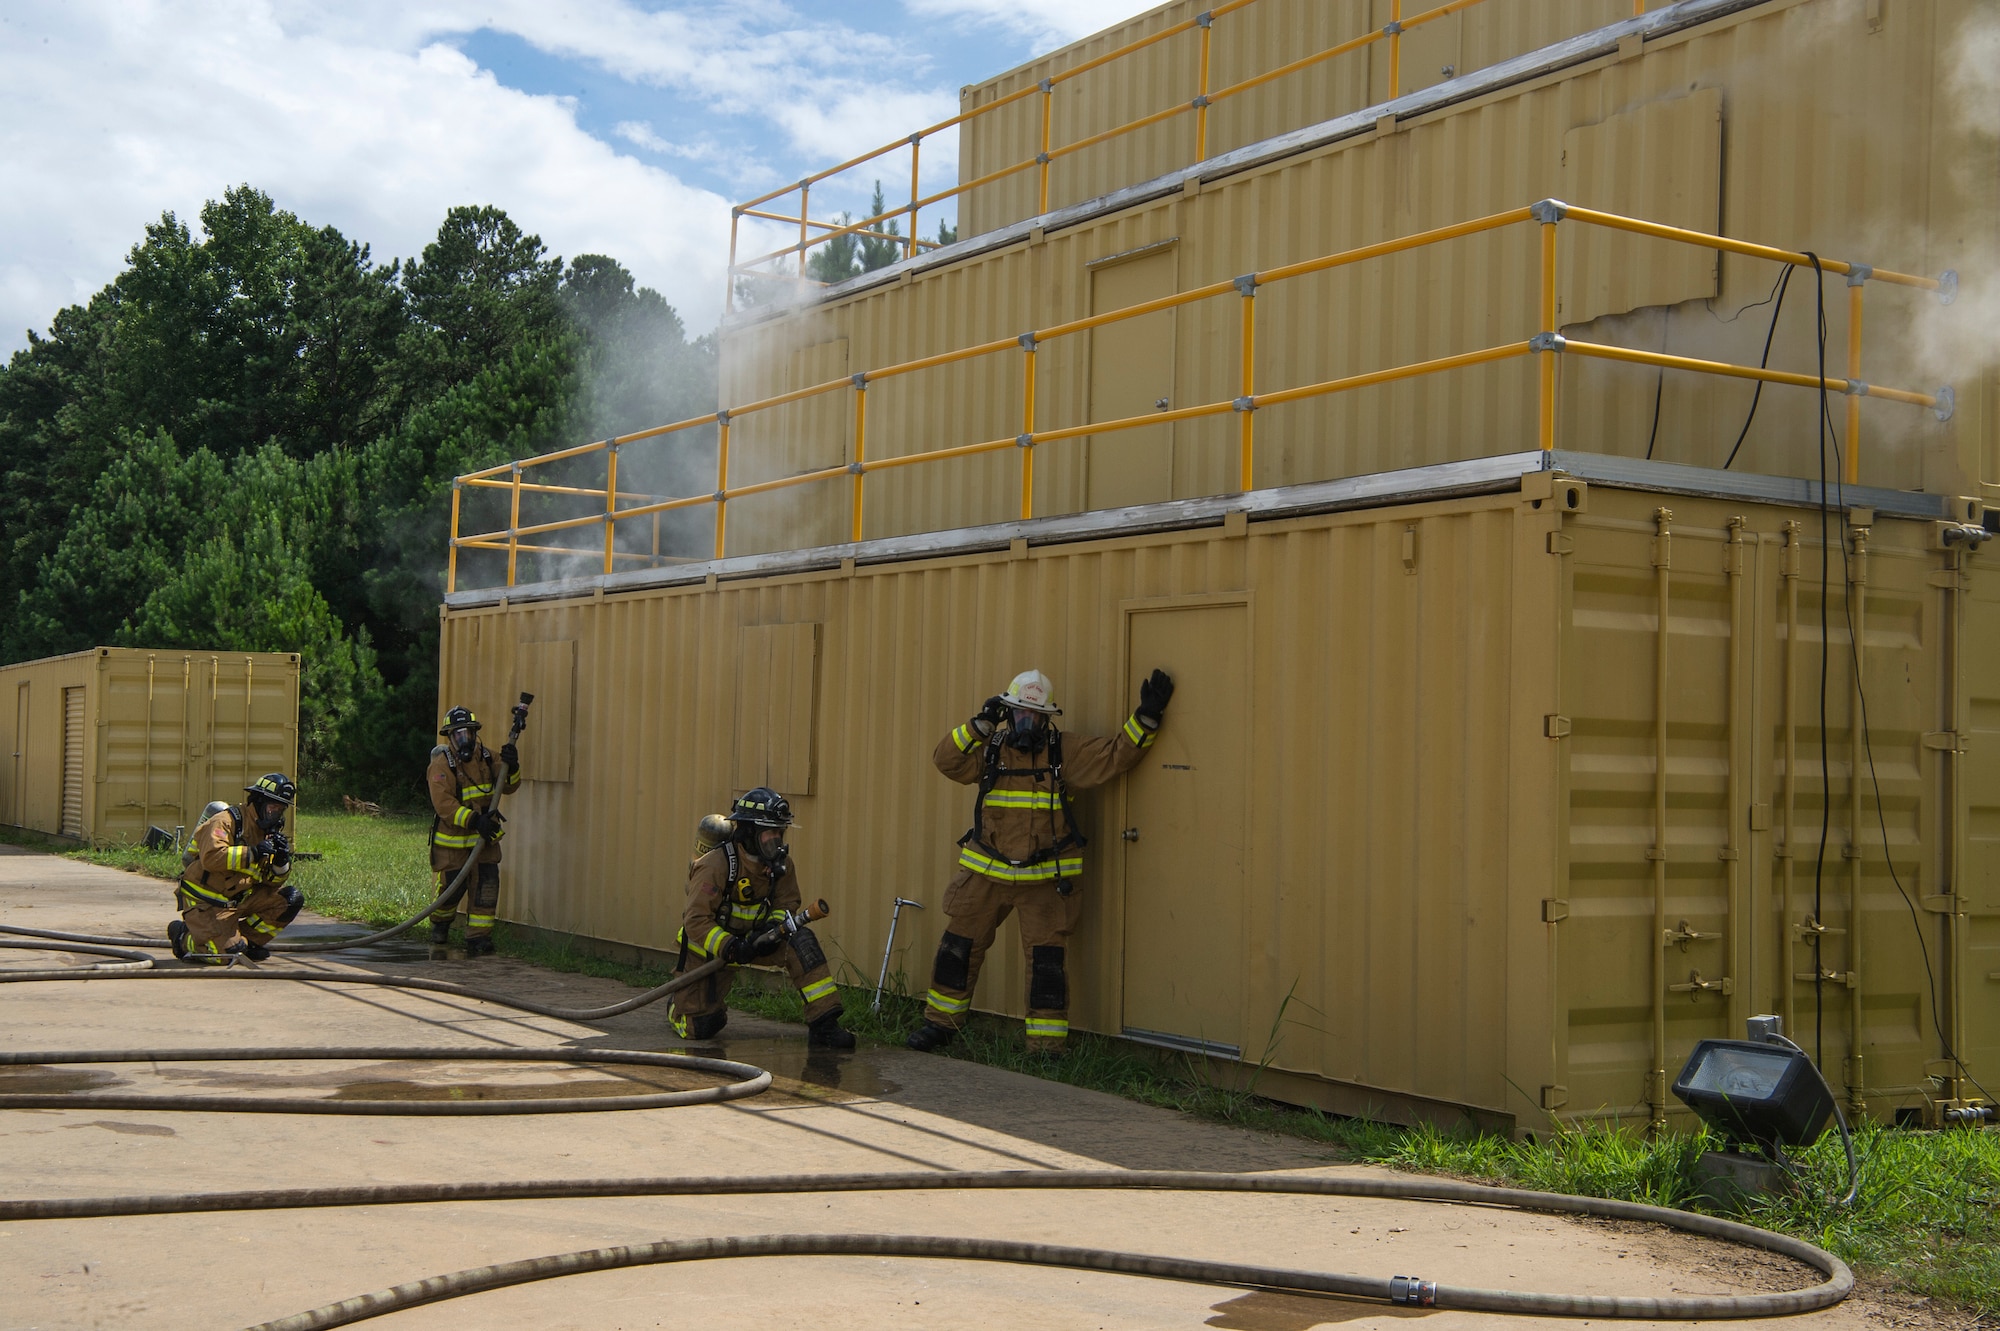 U.S. Air Force firefighters check for the heat source of a simulated three-story building fire as a part of Patriot Warrior 2018 at Dobbins Air Reserve Base, Georgia, August 17, 2018. Firefighters with the 624th Civil Engineer Squadron from Joint Base Pearl Harbor-Hickam, Hawaii, 446th CES from Joint Base Lewis-McChord, Washington and the 514th CES from Joint Base McGuire-Dix-Lakehurst, New Jersey, trained together as one team. Patriot Warrior is an Air Force Reserve exercise designed to prepare Reserve Citizen Airmen for world-wide deployments and provides knowledge and experience to strengthen home station training programs. (Air Force photo by Master Sgt. Theanne Herrmann)